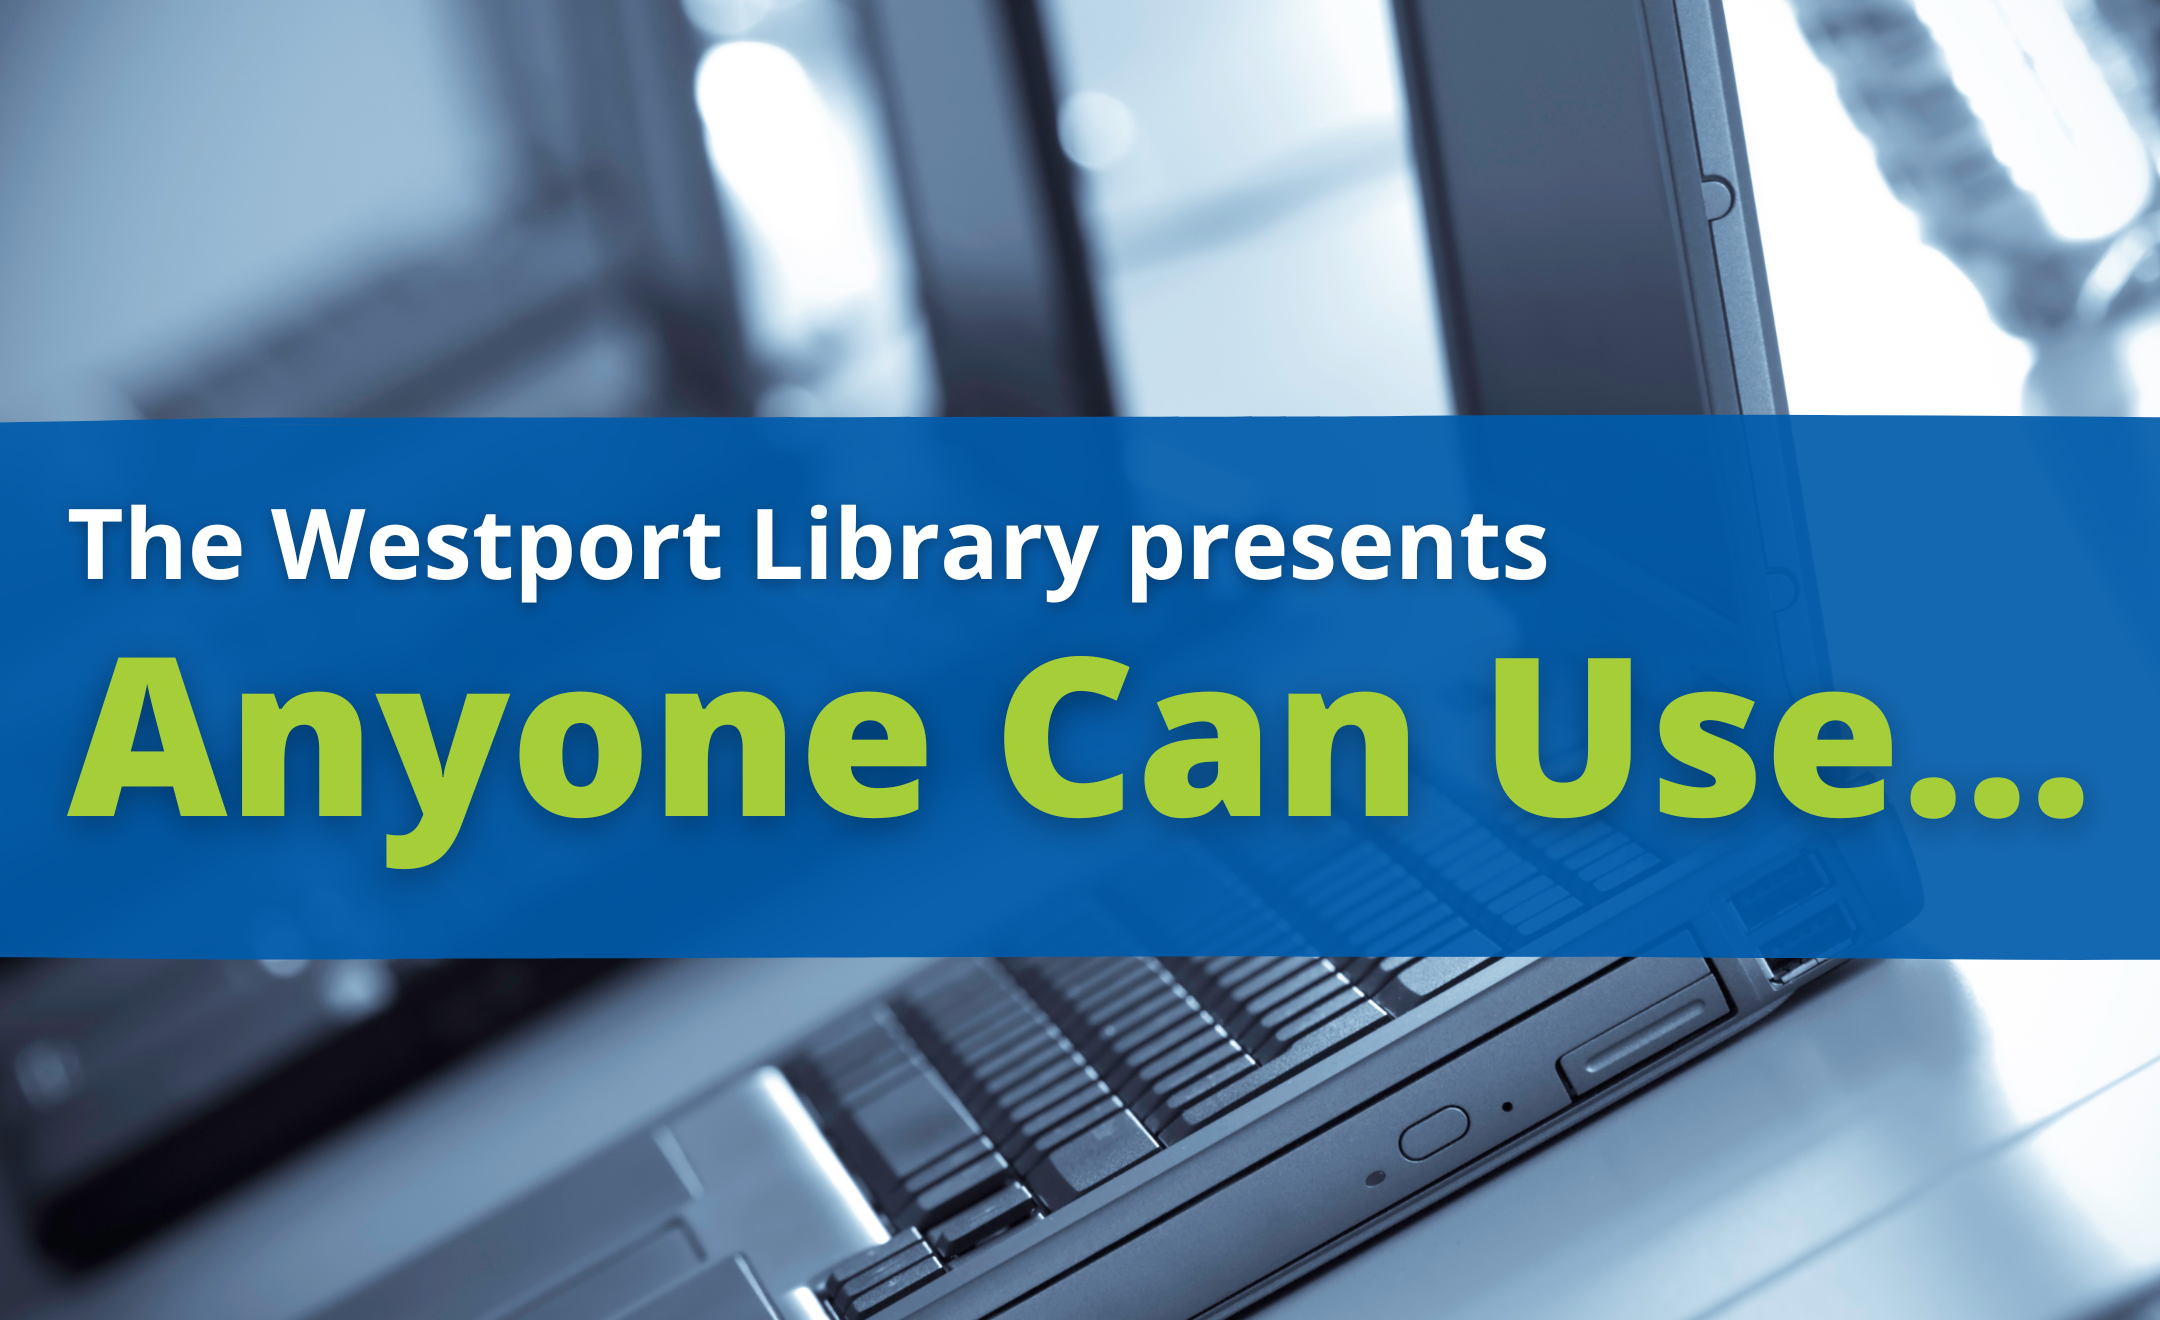 The Westport Library Presents: Anyone Can Use